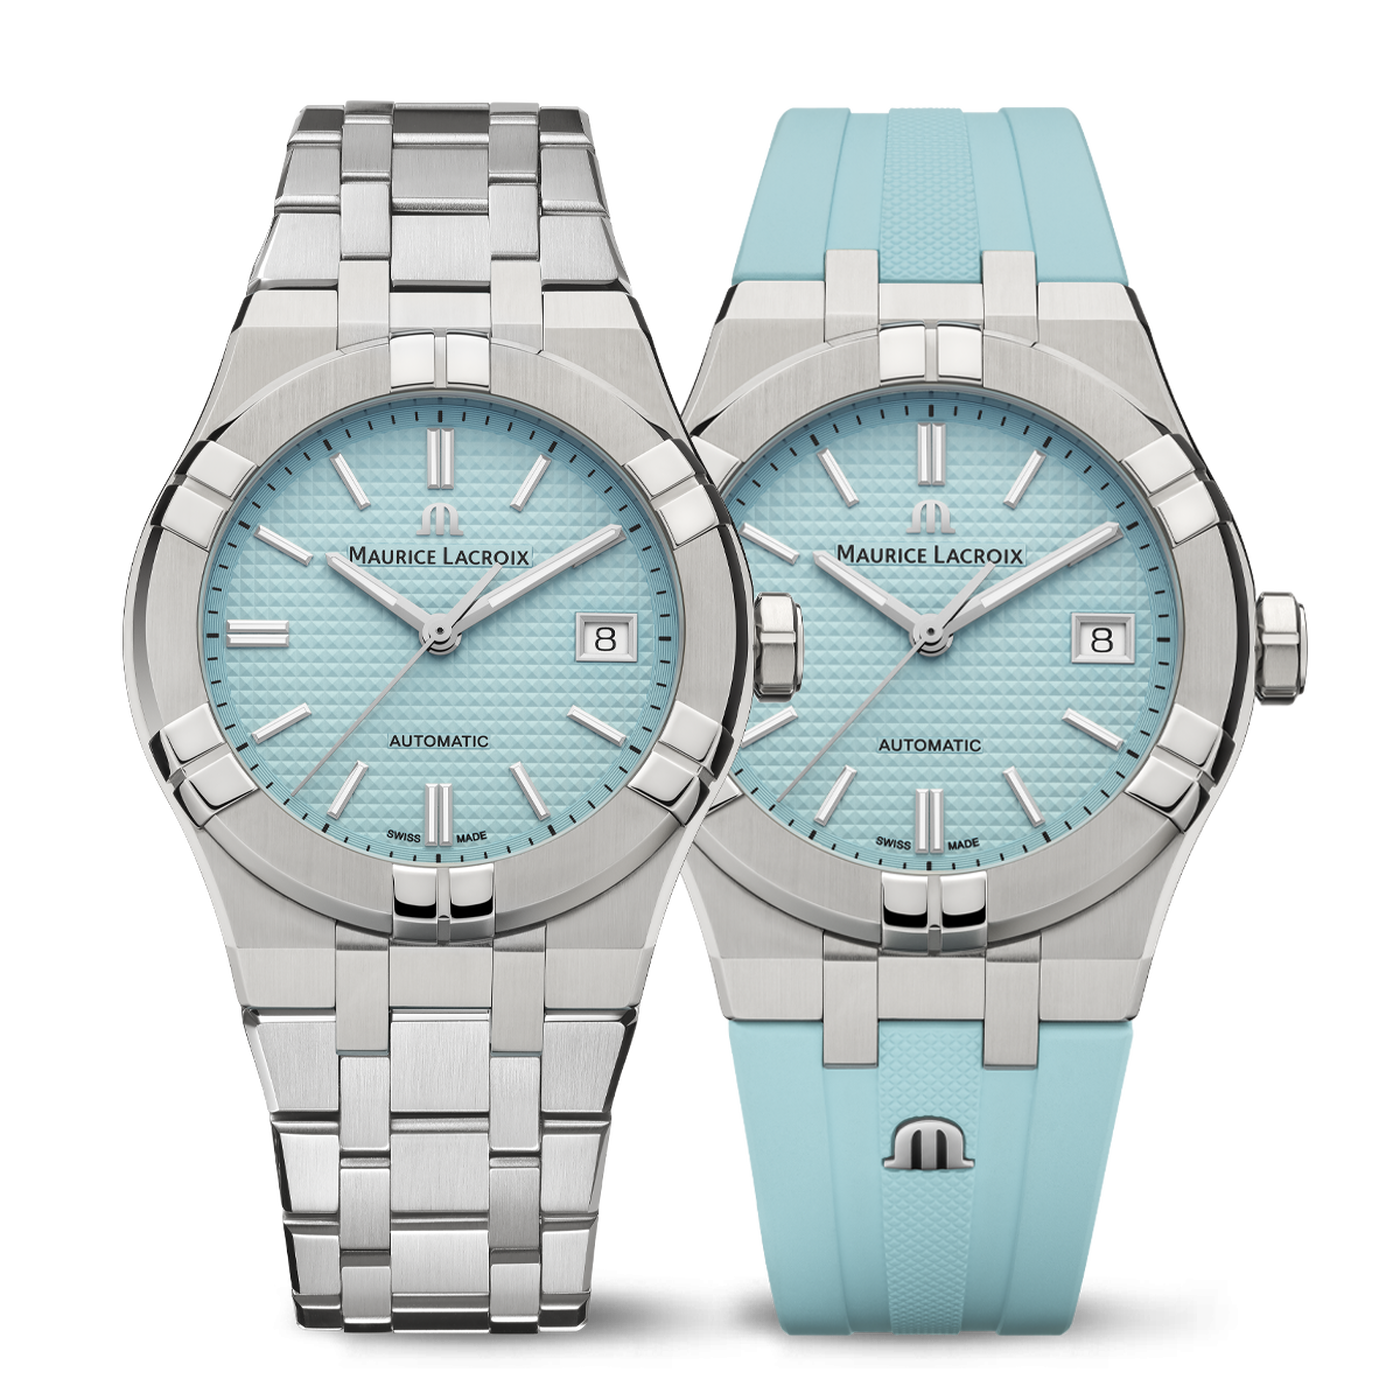 AIKON AUTOMATIC LIMITED SUMMER EDITION 39MM